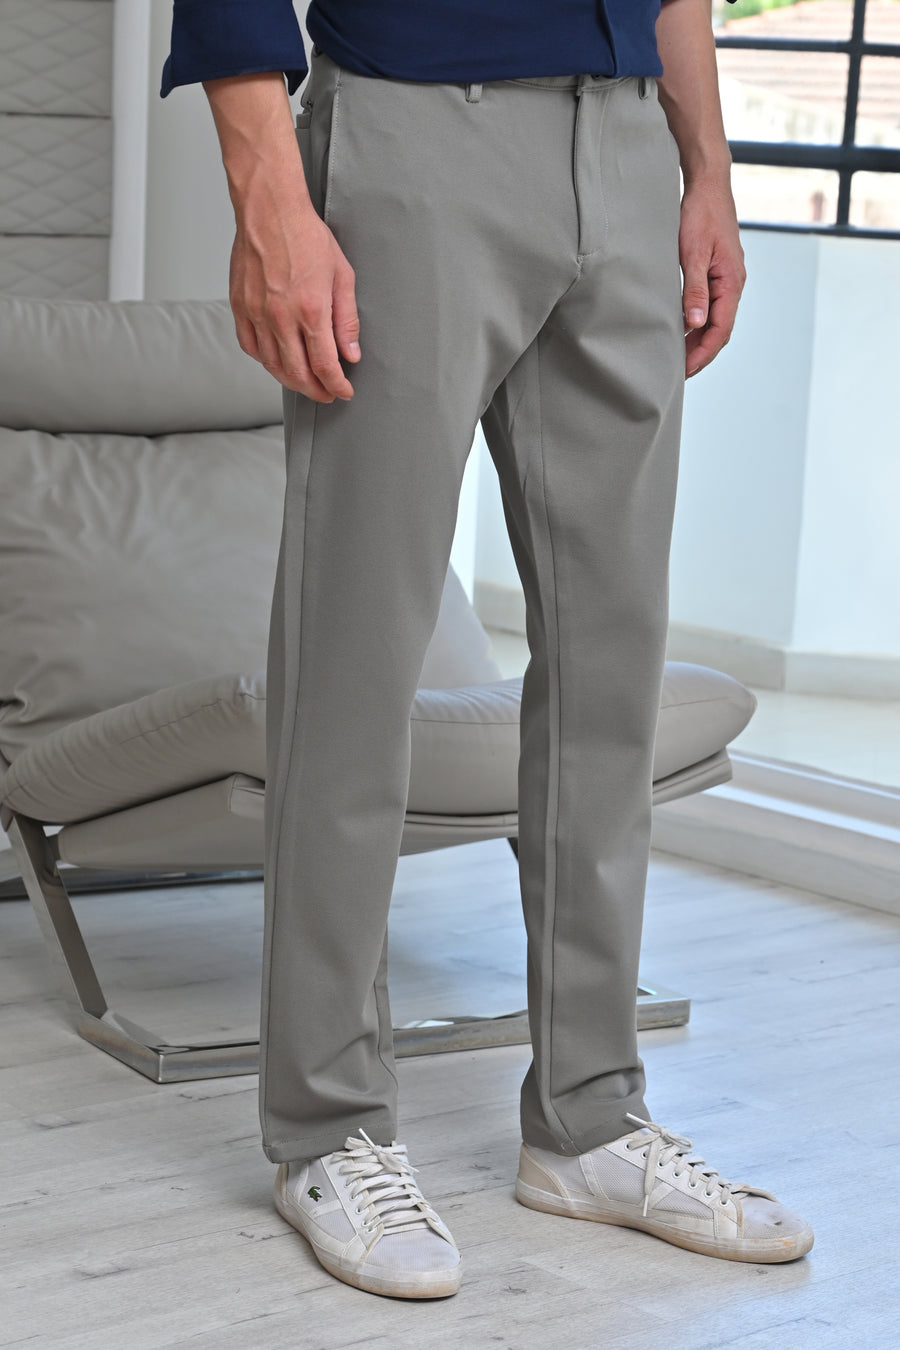 Atlee - Comfort Knitted Trouser - Pista